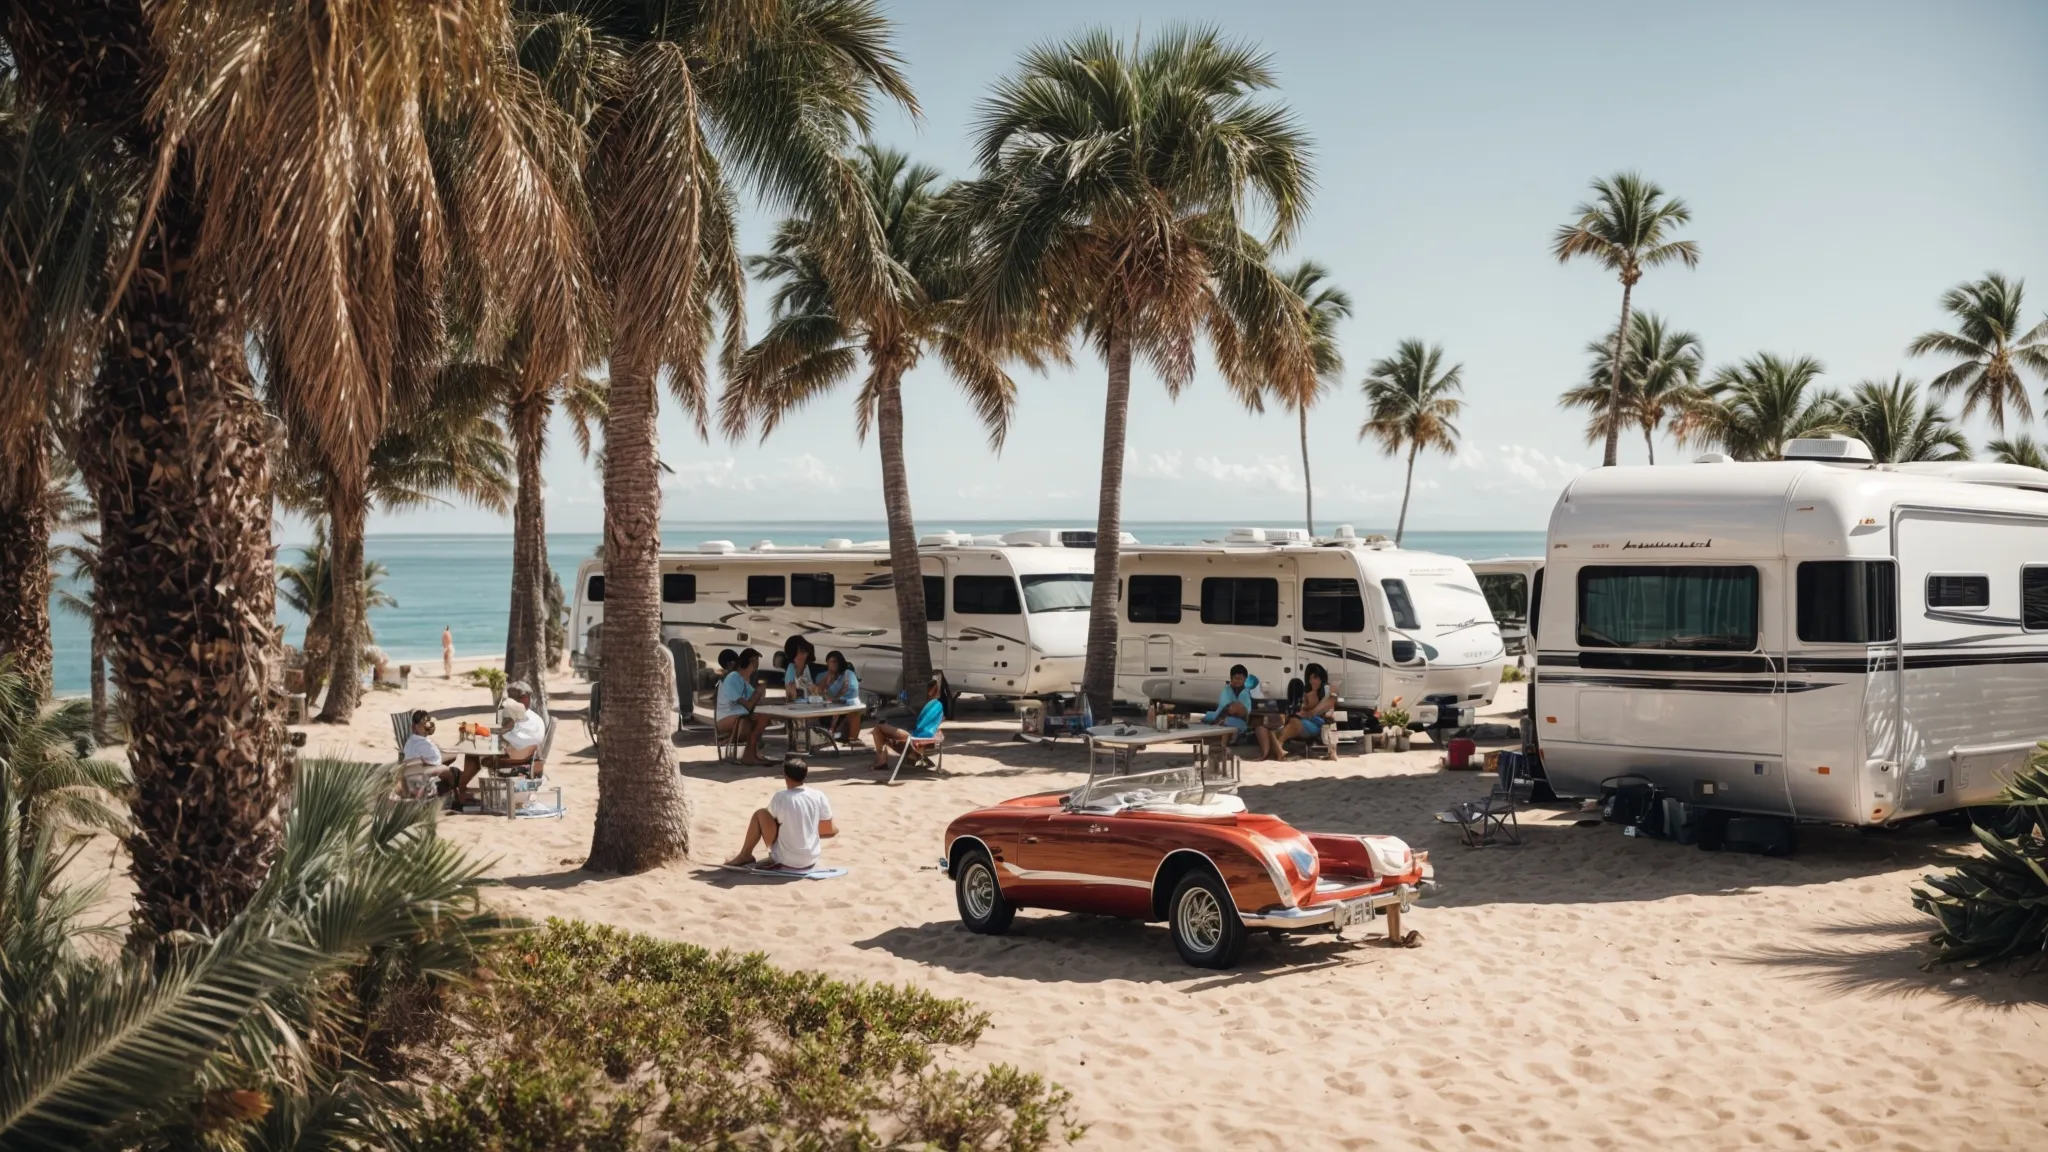 a wide-angle view of rvs parked amidst palm trees with the ocean in the background as families relax under the sun.